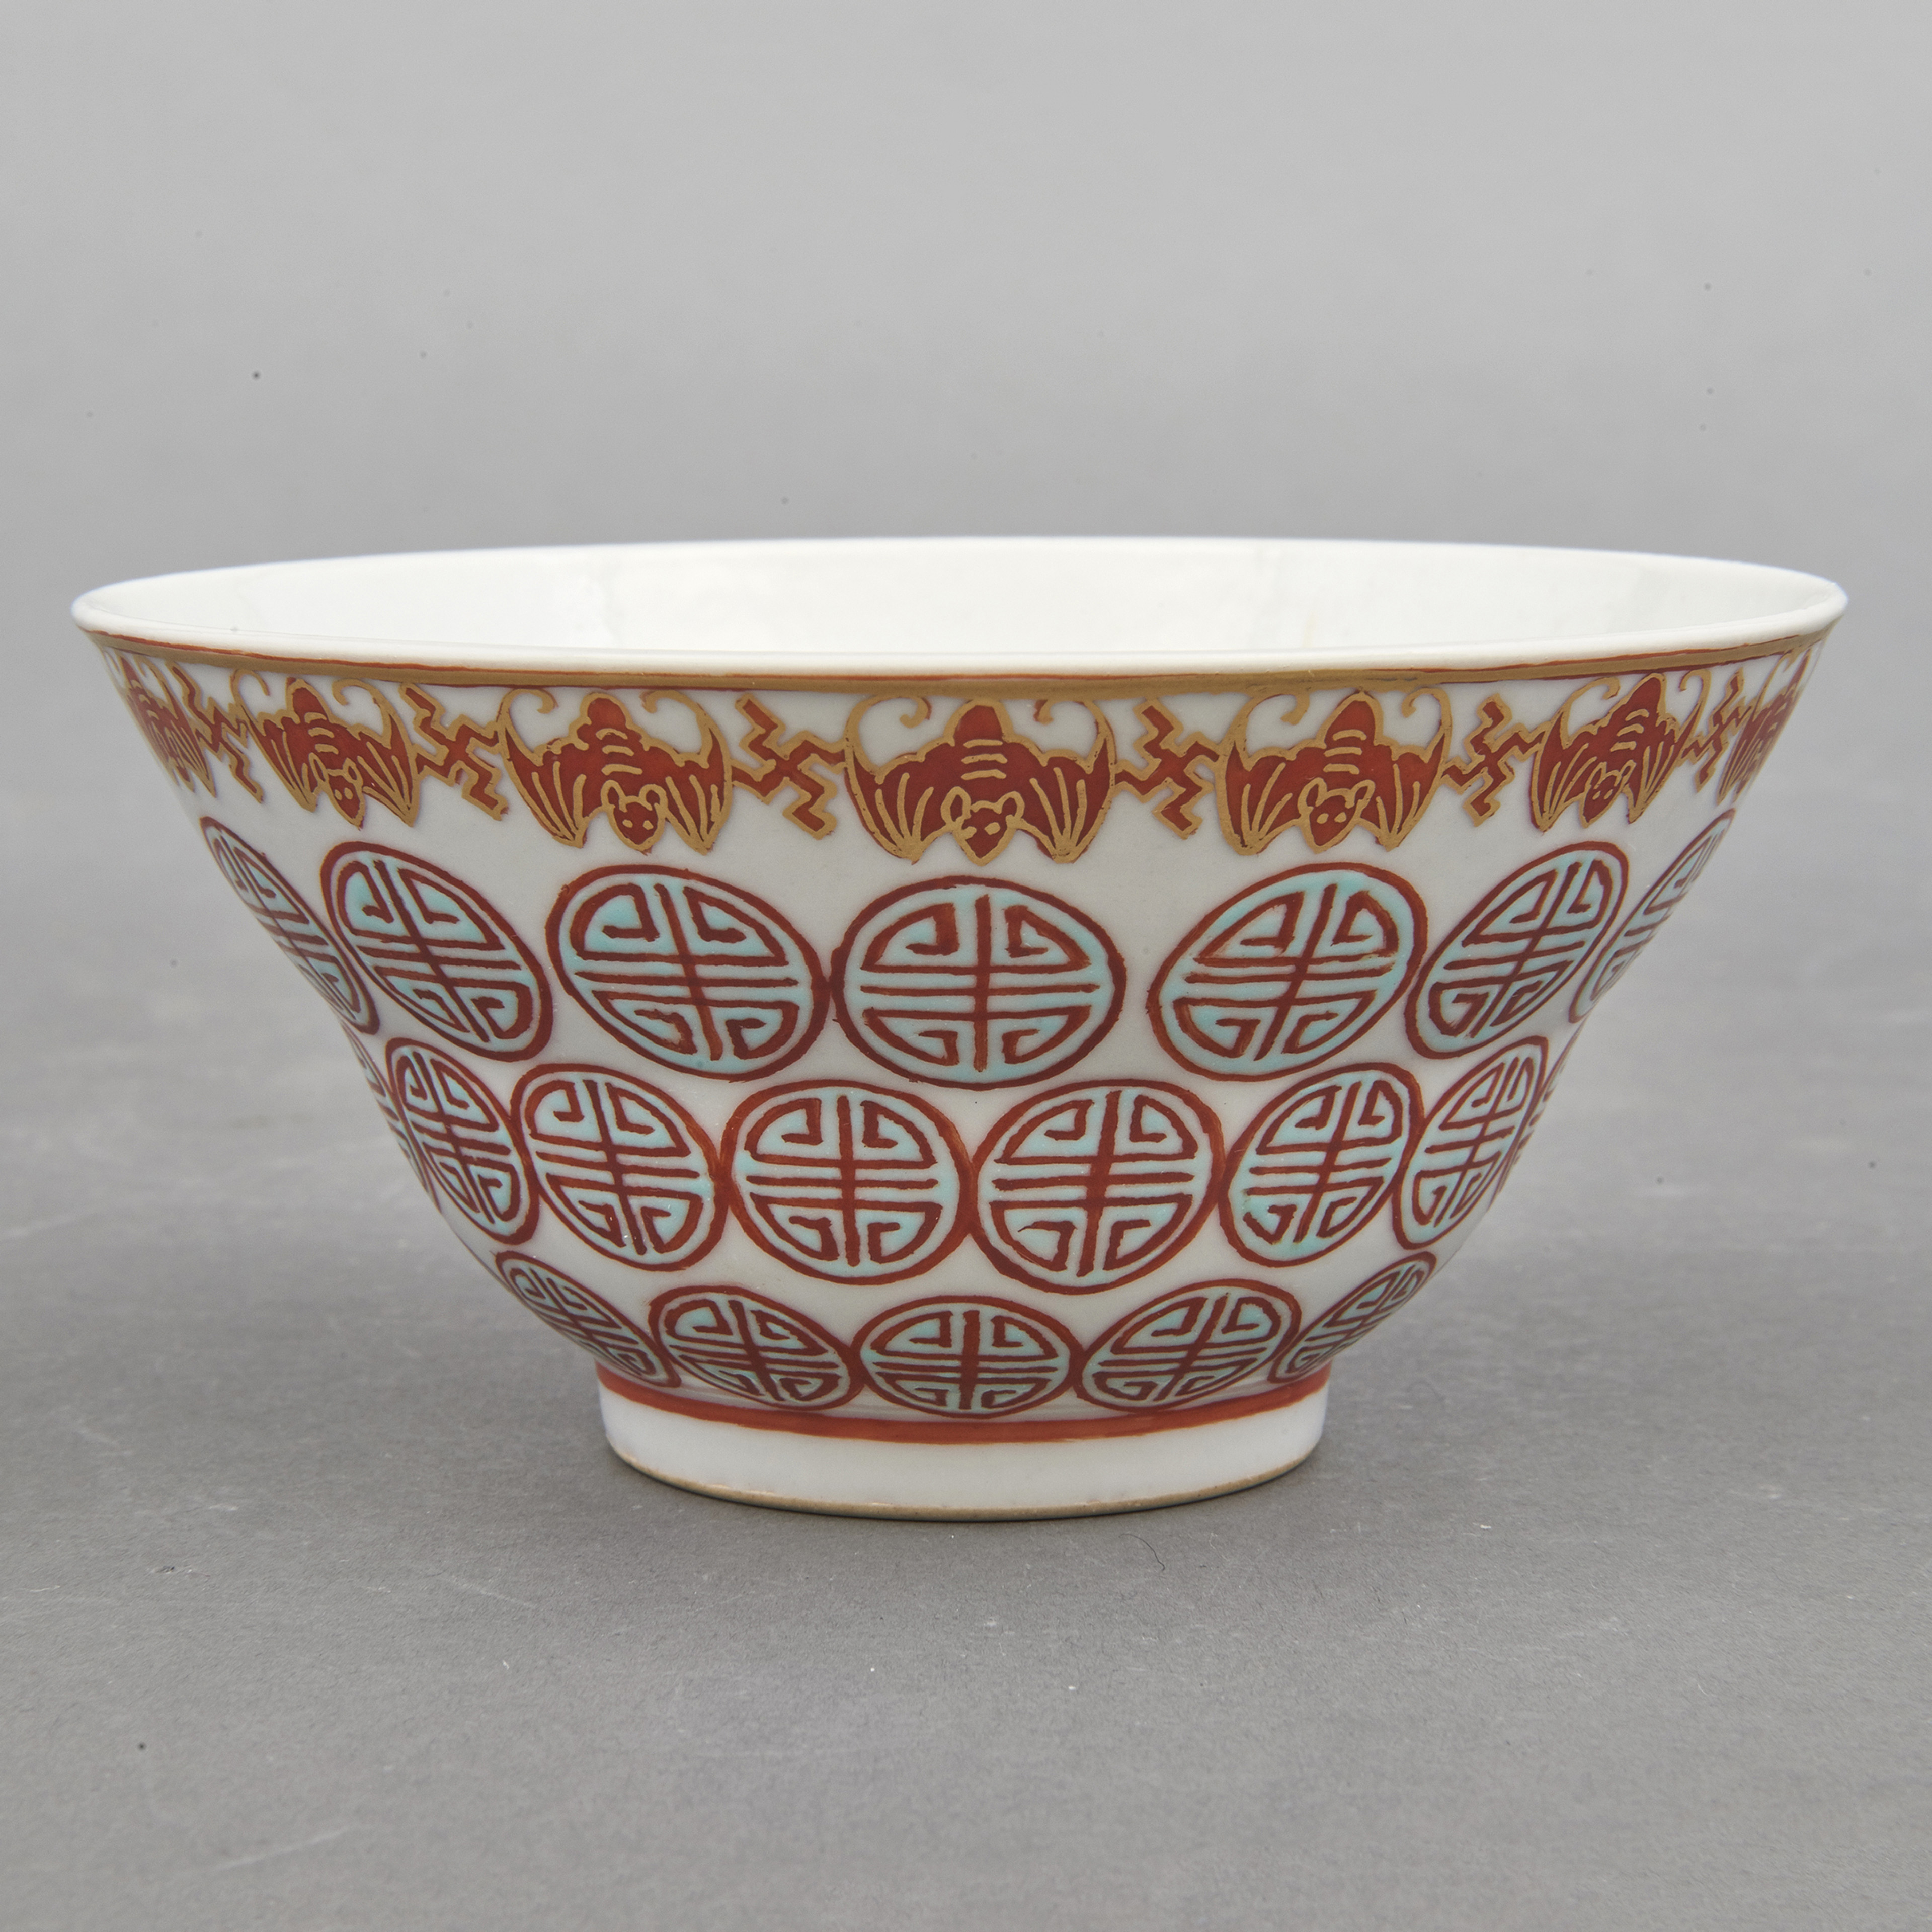 CHINESE IRON RED DECORATED BOWL 3a62ed